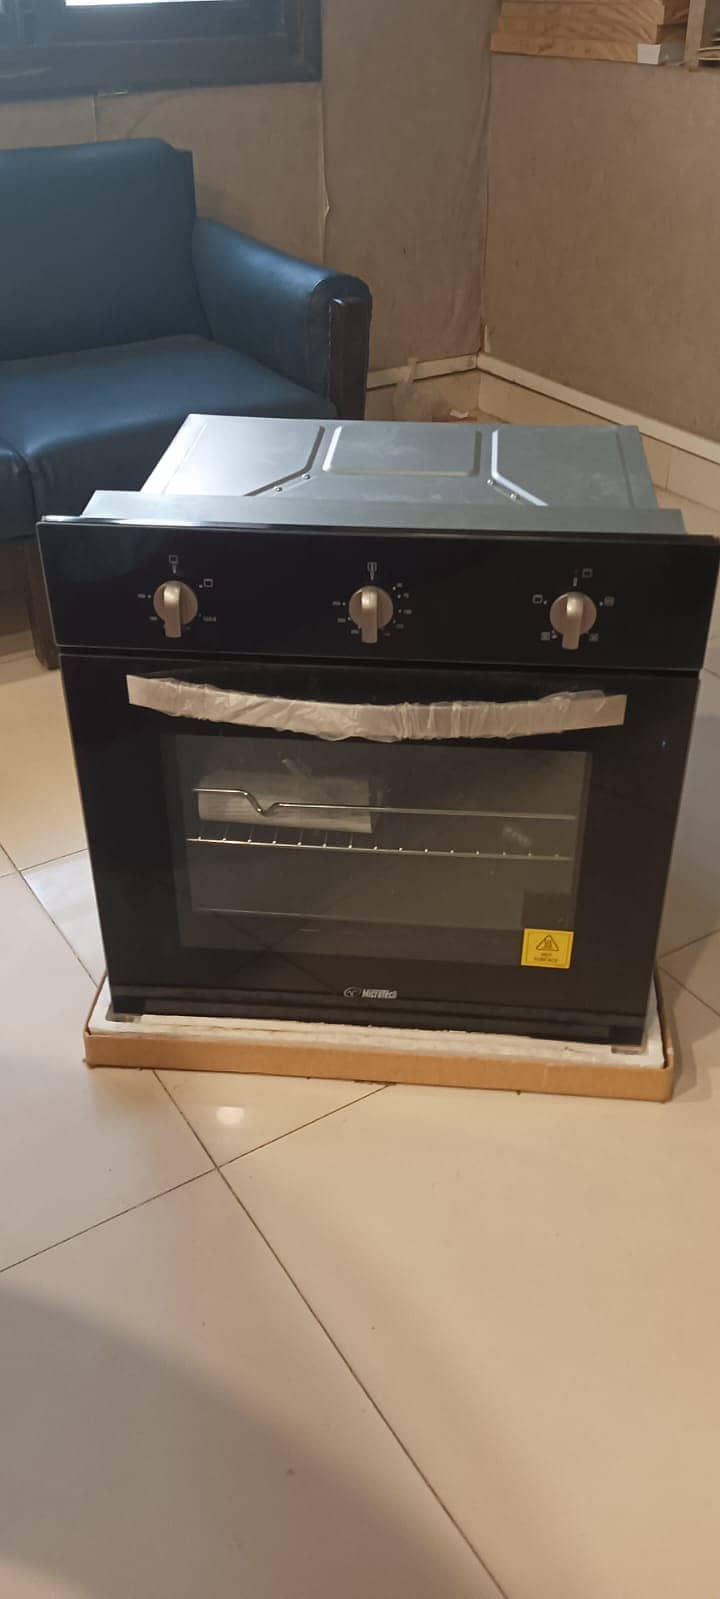 Microtech Electic and gas Baking Oven - Built-In Dual Fuel (MTB-6303B) 5